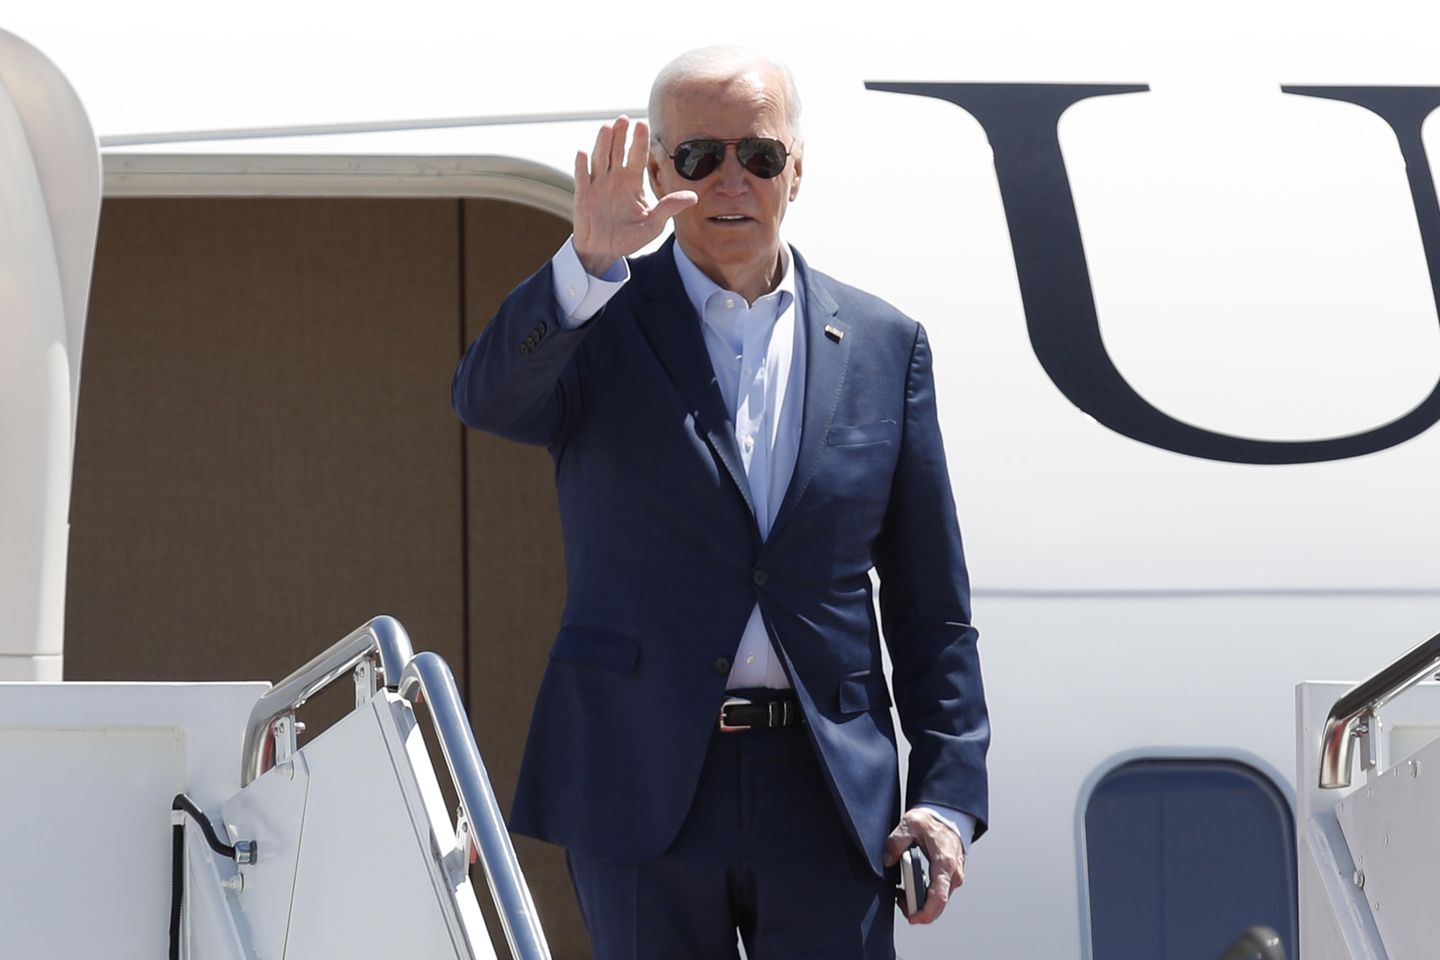 Poll suggests Biden may be nearing 'point of no return'
